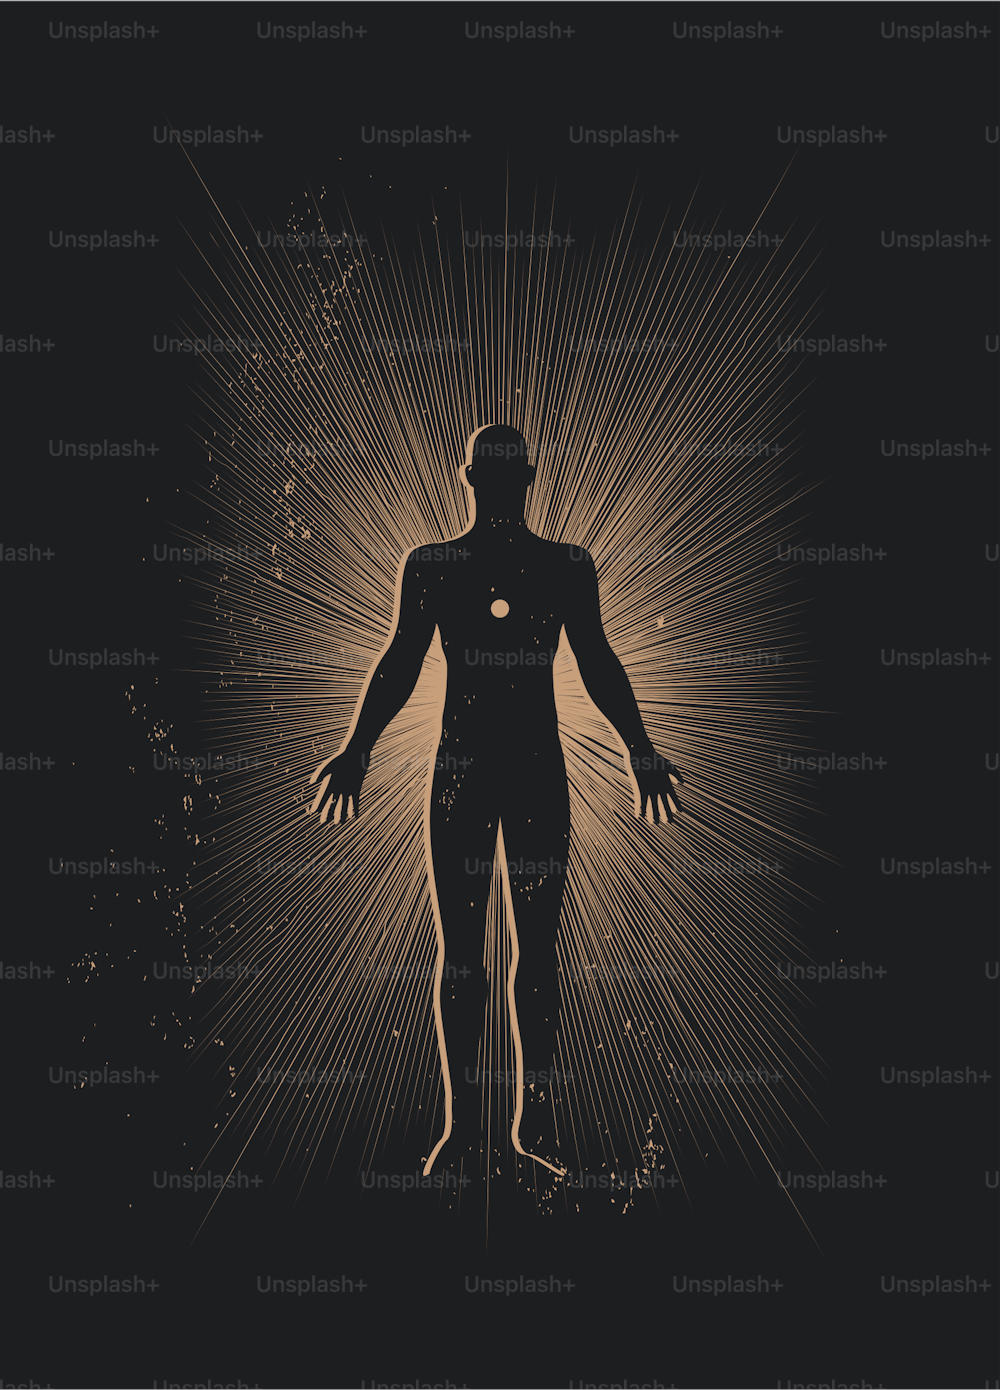 Spiritual human body silhouette surrounded sun rays on black background. Trance or meditation or astral body concept illustration for poster or wall art print design. Vector eps 10 illustration